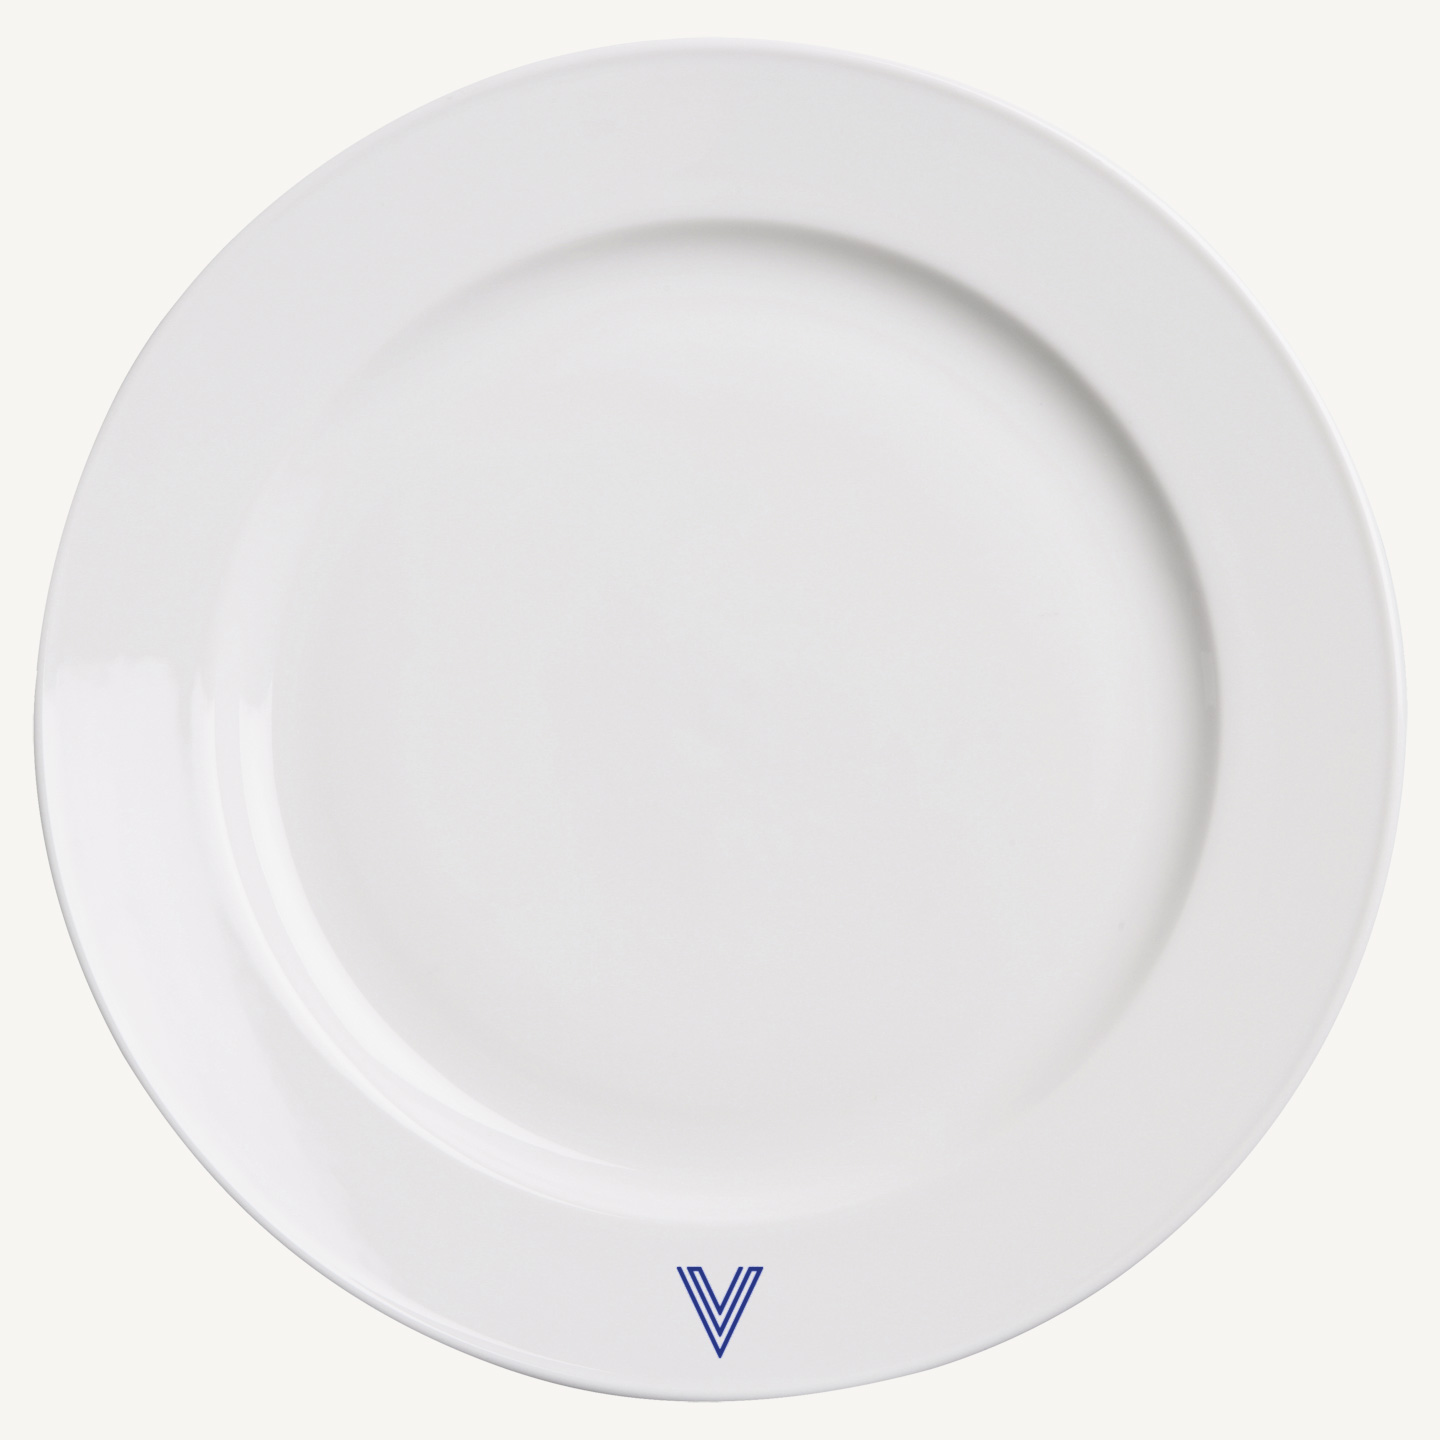 nelsoncouto-work-viand-plate-v2